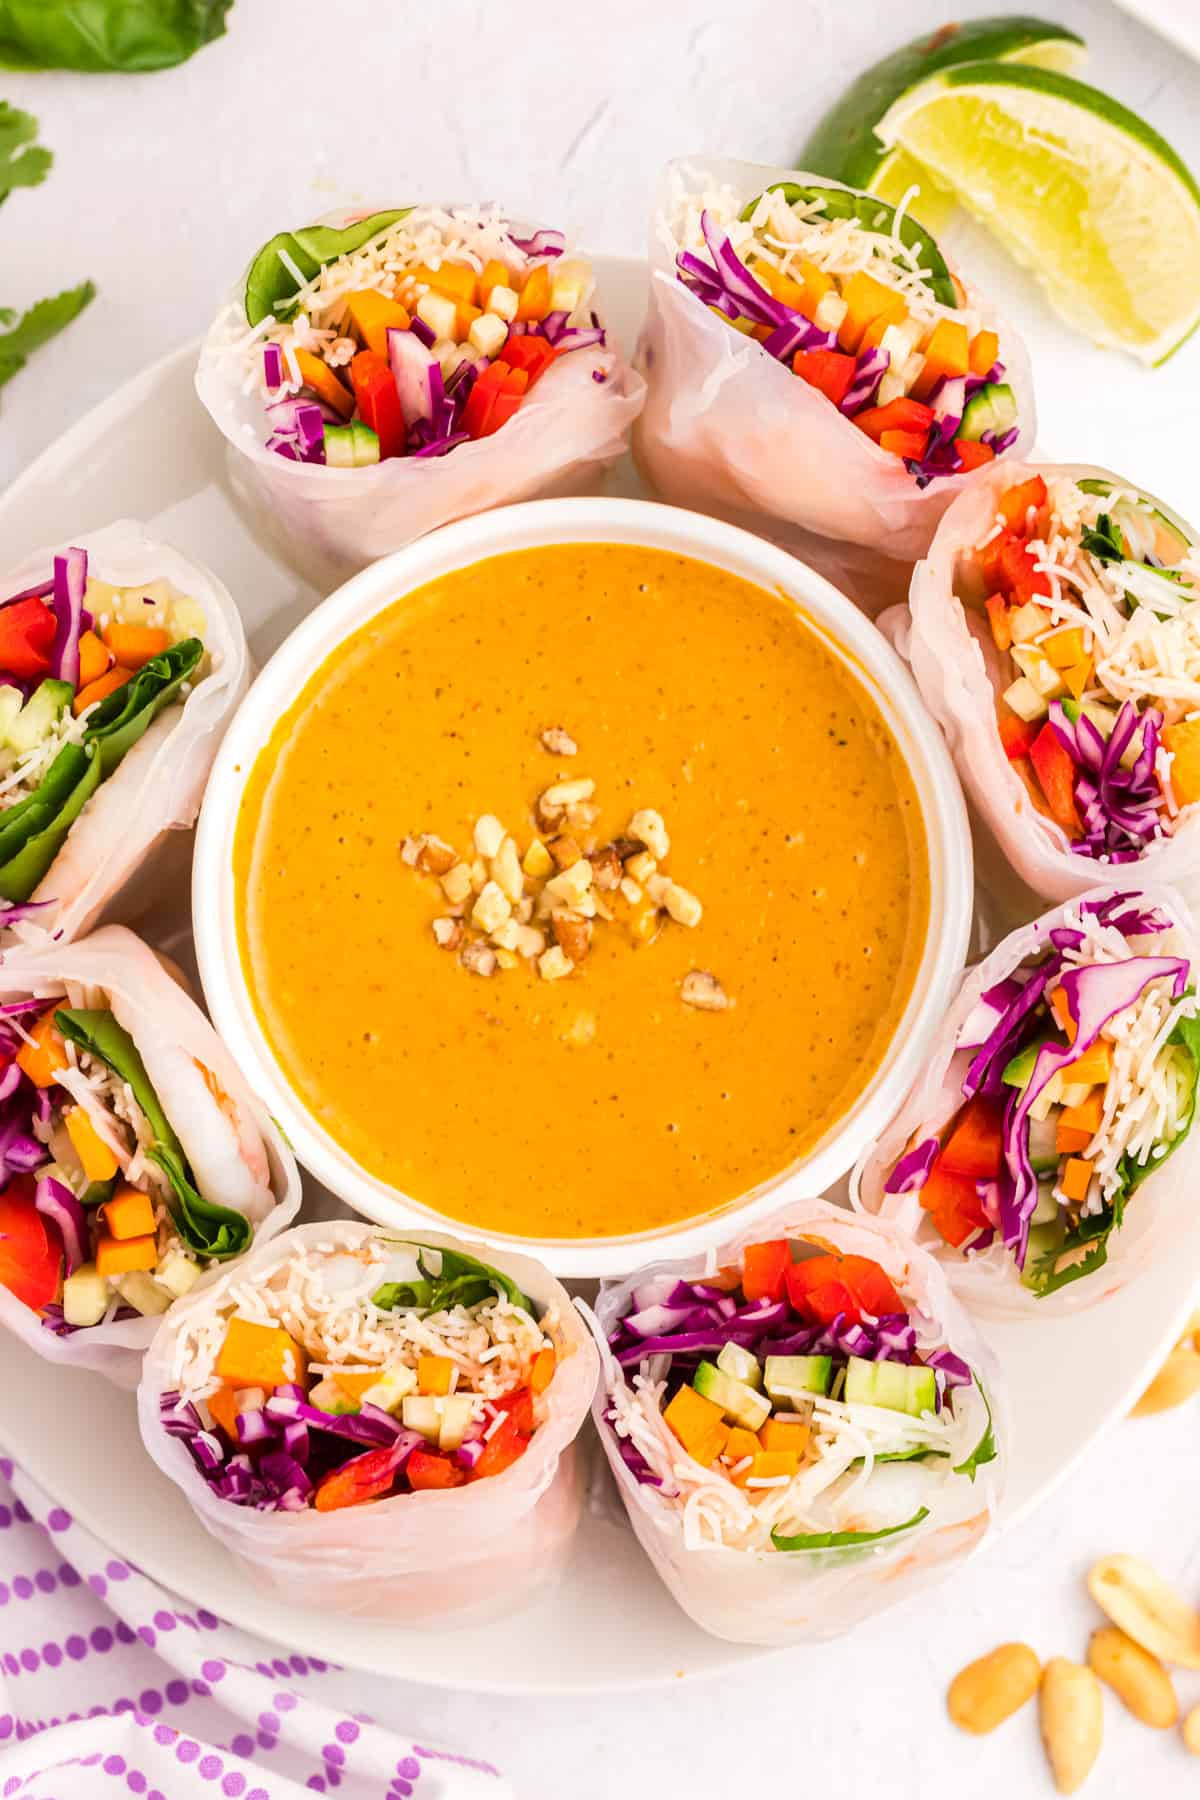 A large serving of peanut sauce is presented in the middle of severeal halved summer rolls.